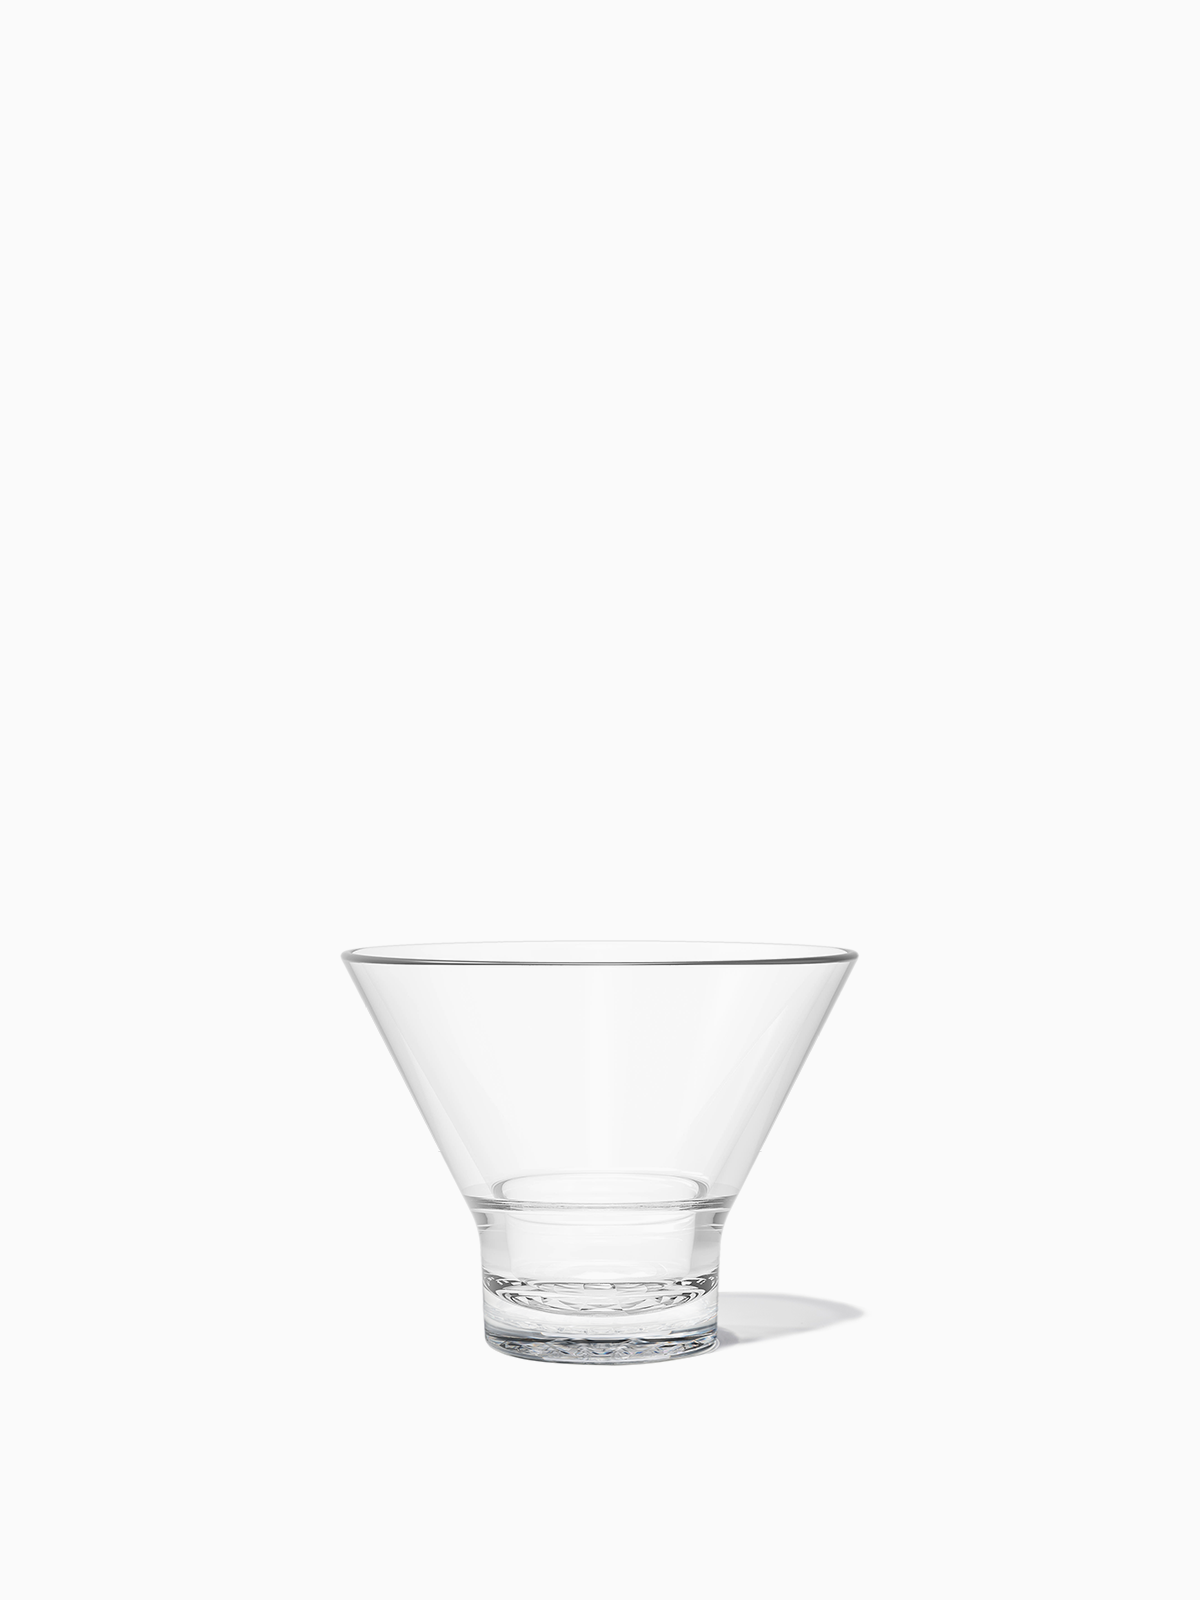 BTGLLAS Set of 6 Martini Glasses - 8-Ounce Cinched Design Cocktail Glasses with Heavy Base, Stemless Construction for Stability - Sturdy and Elegant